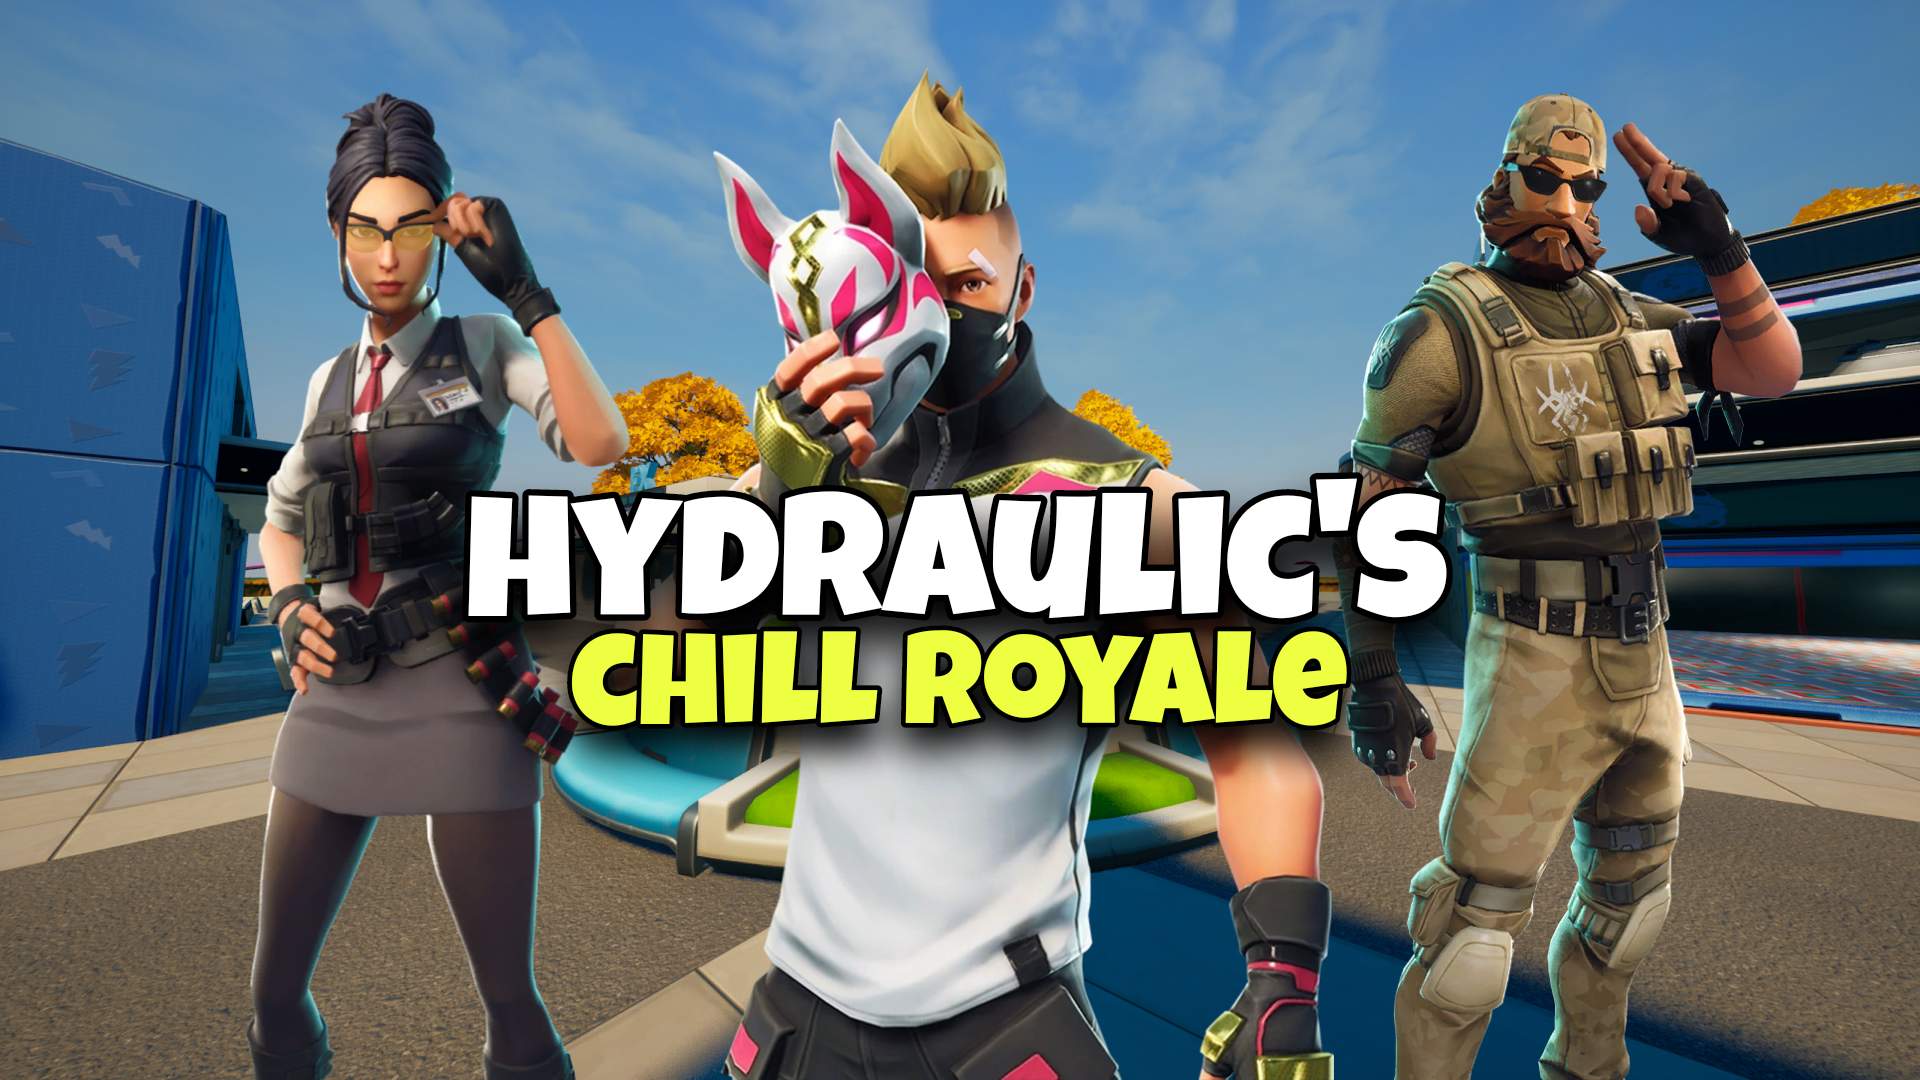 Hydraulic's Chill Royale